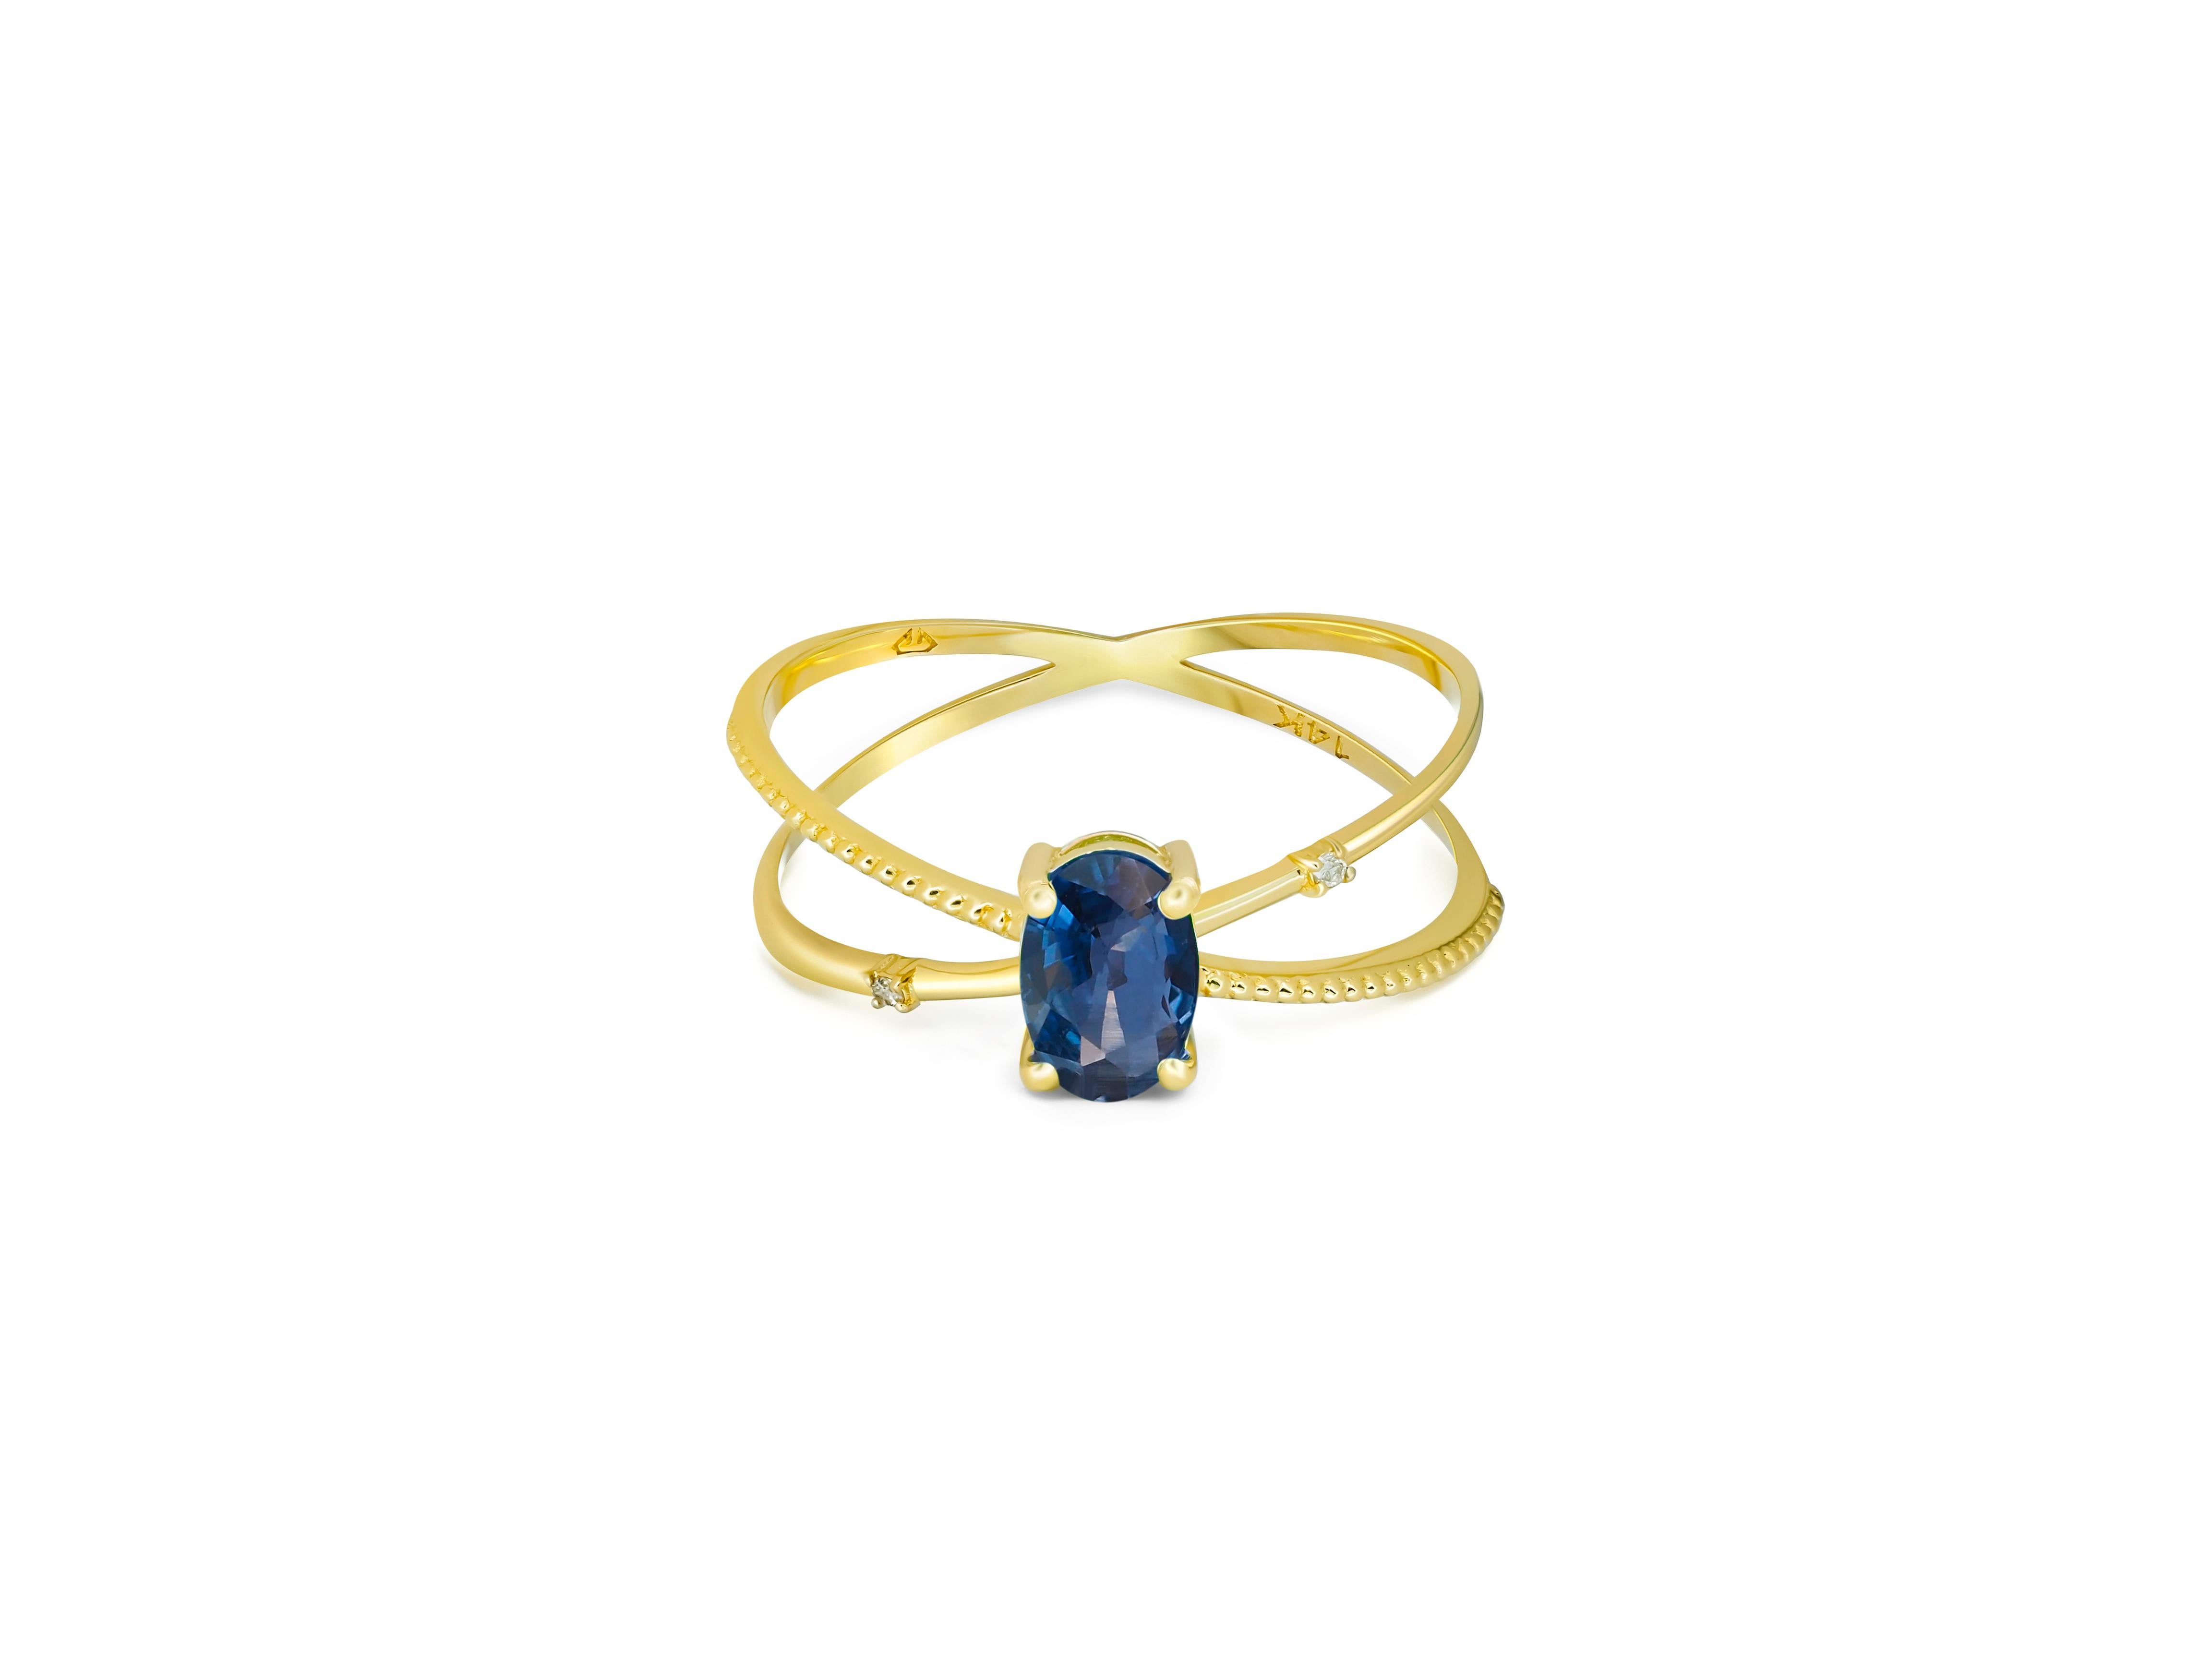 Sapphire spiral ring. Oval Sapphire ring. Sapphire gold ring. 14k gold ring with Sapphire. Minimalist Sapphire ring. Sapphire engagement ring. December Birthstone Ring. Sapphire Vintage ring. Sapphire Dainty ring. Sapphire Wrap Around Ring. Sapphire